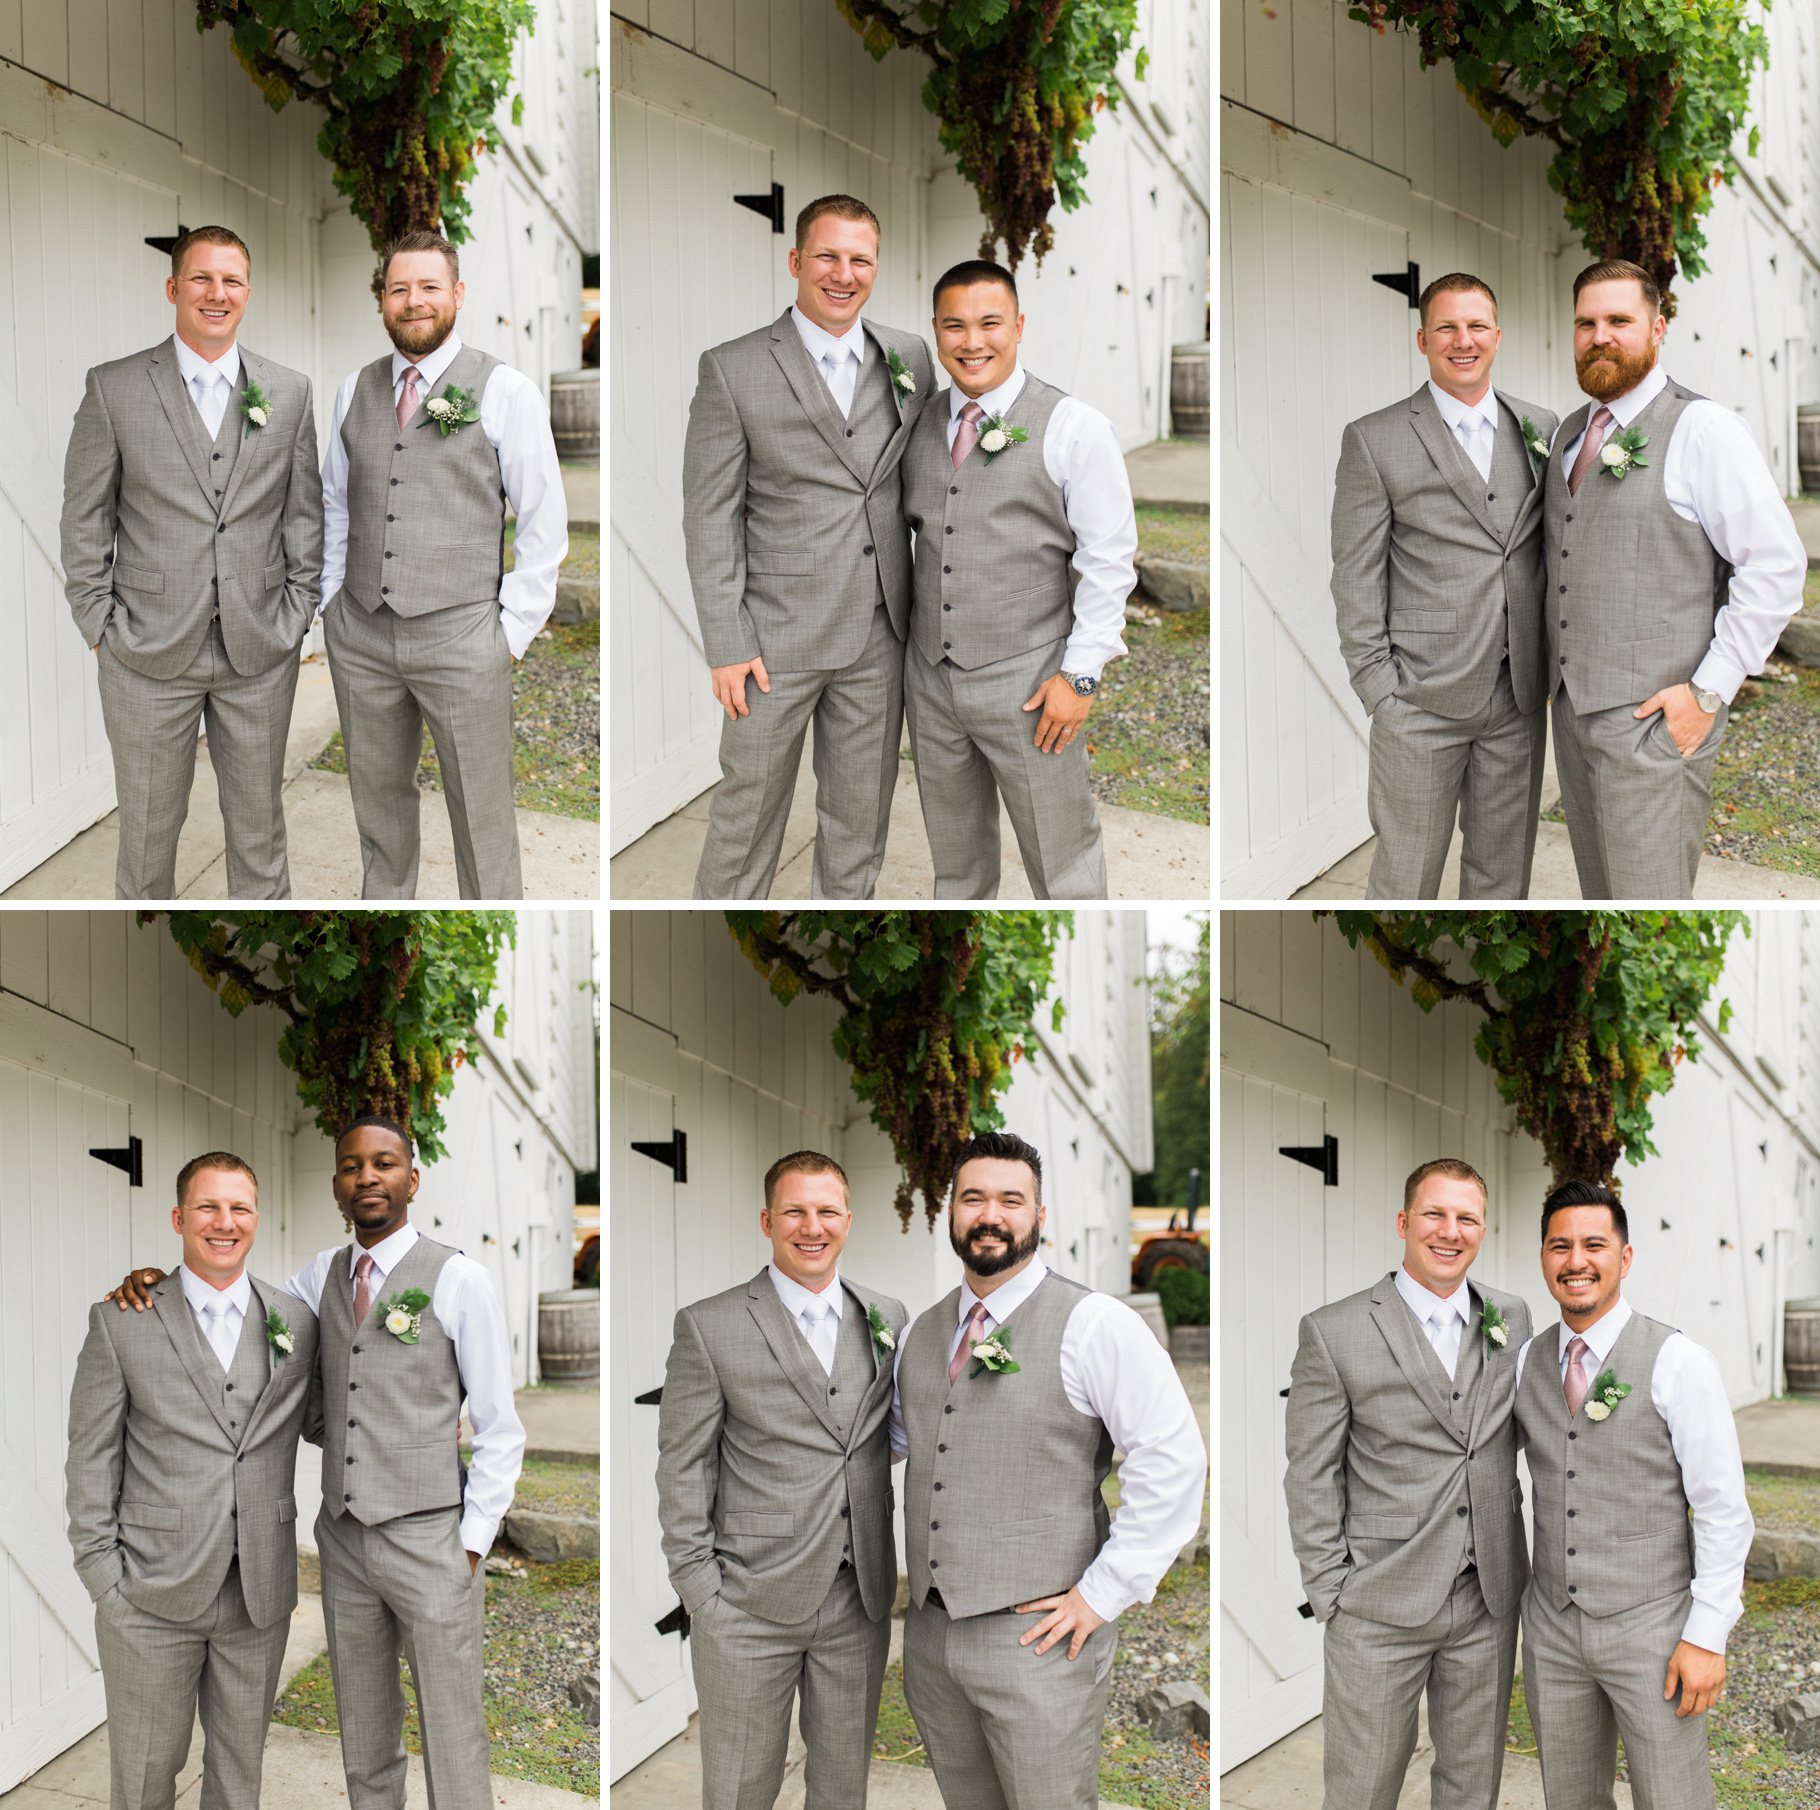 21-Delille-Cellars-Chateau-Vineyard-Groom-Groomsmen-Wedding-Photography-by-Betty-Elaine-Woodinville-Winery-Seattle-Photographer